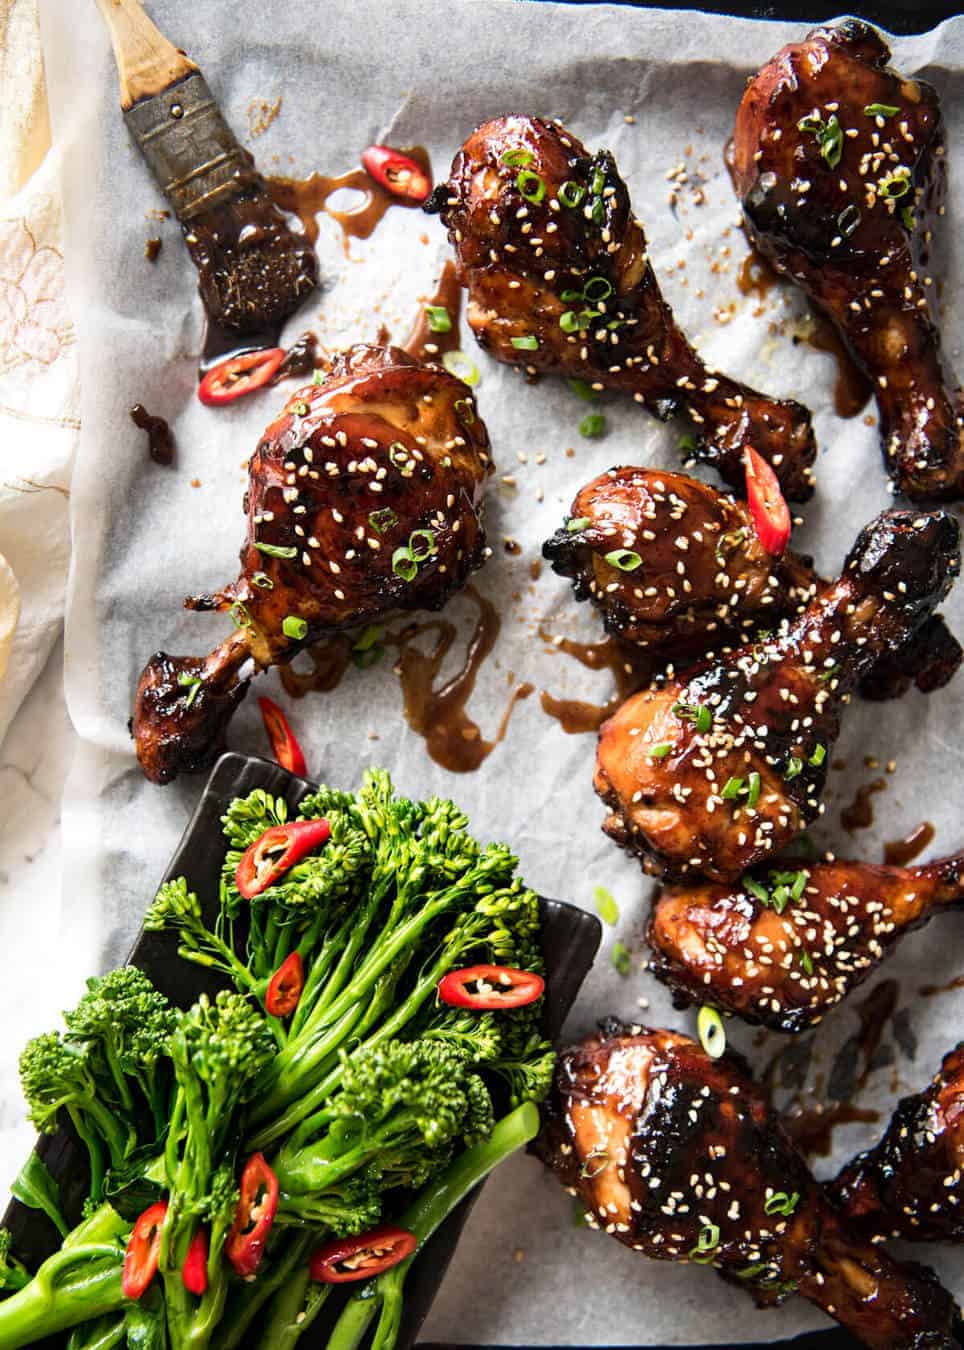 Sticky Chicken Drumsticks in Chinese Plum Sauce - Just a handful of ingredients, 5 minutes prep and awesome stickiness! www.recipetineats.com